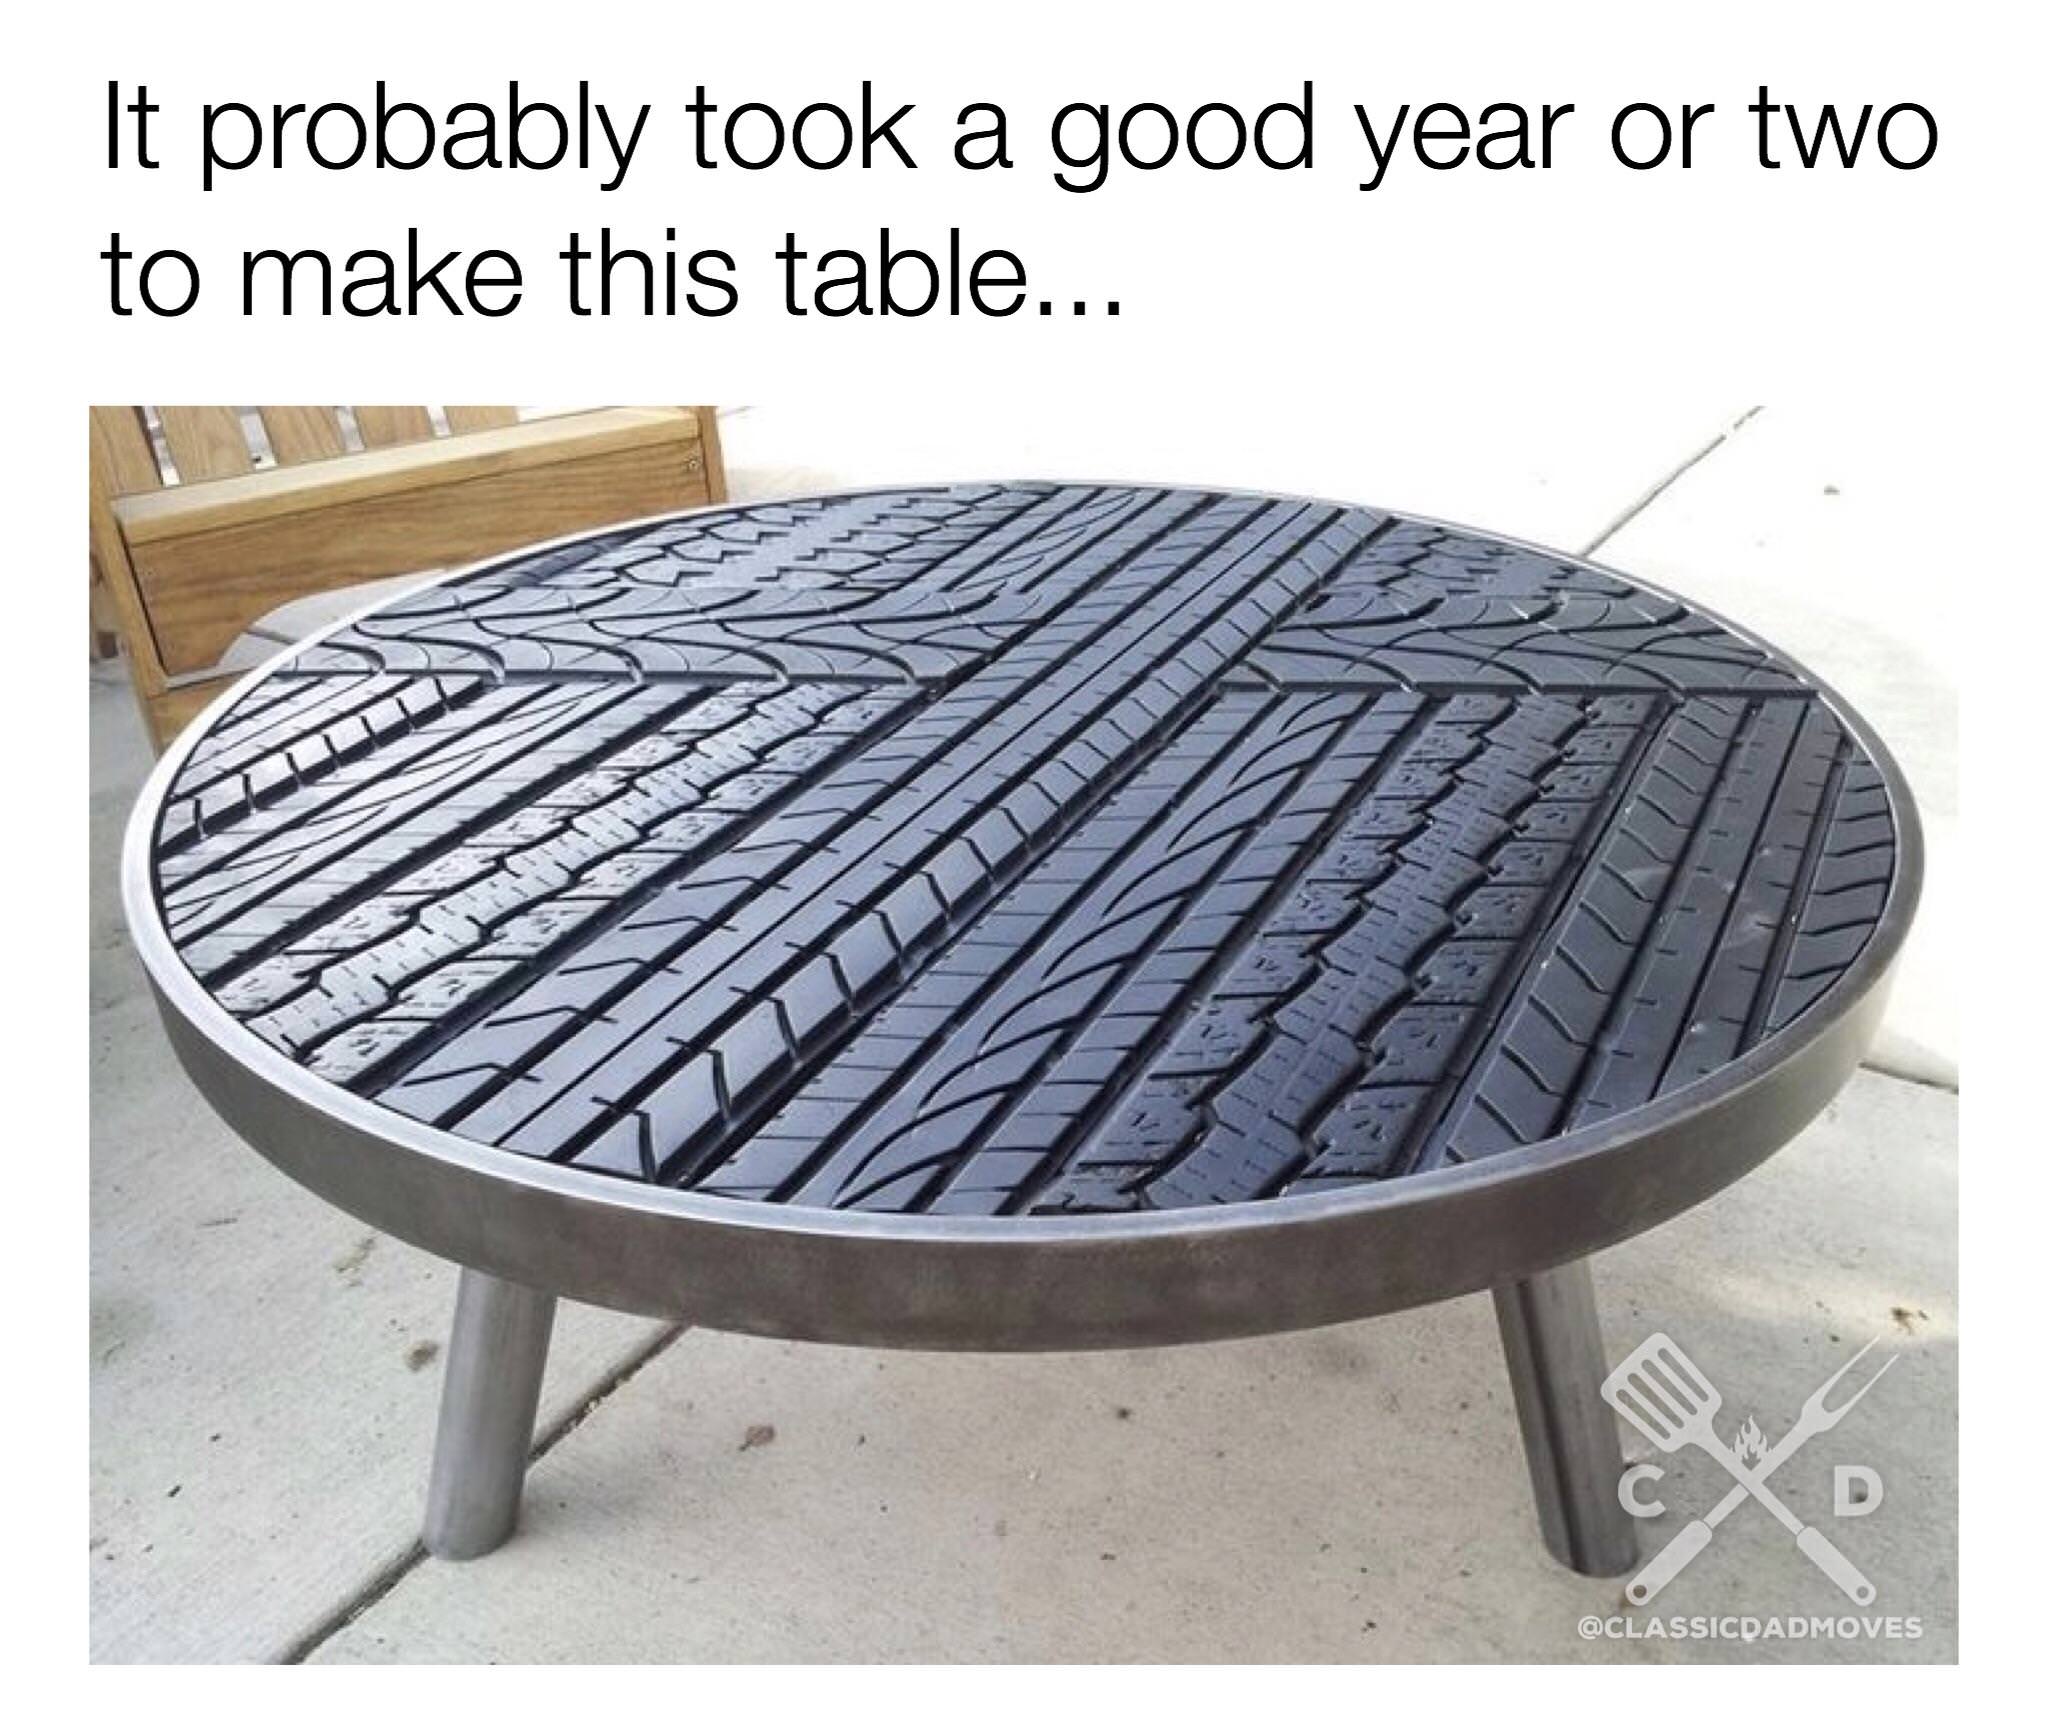 goodyear or two table - It probably took a good year or two to make this table...